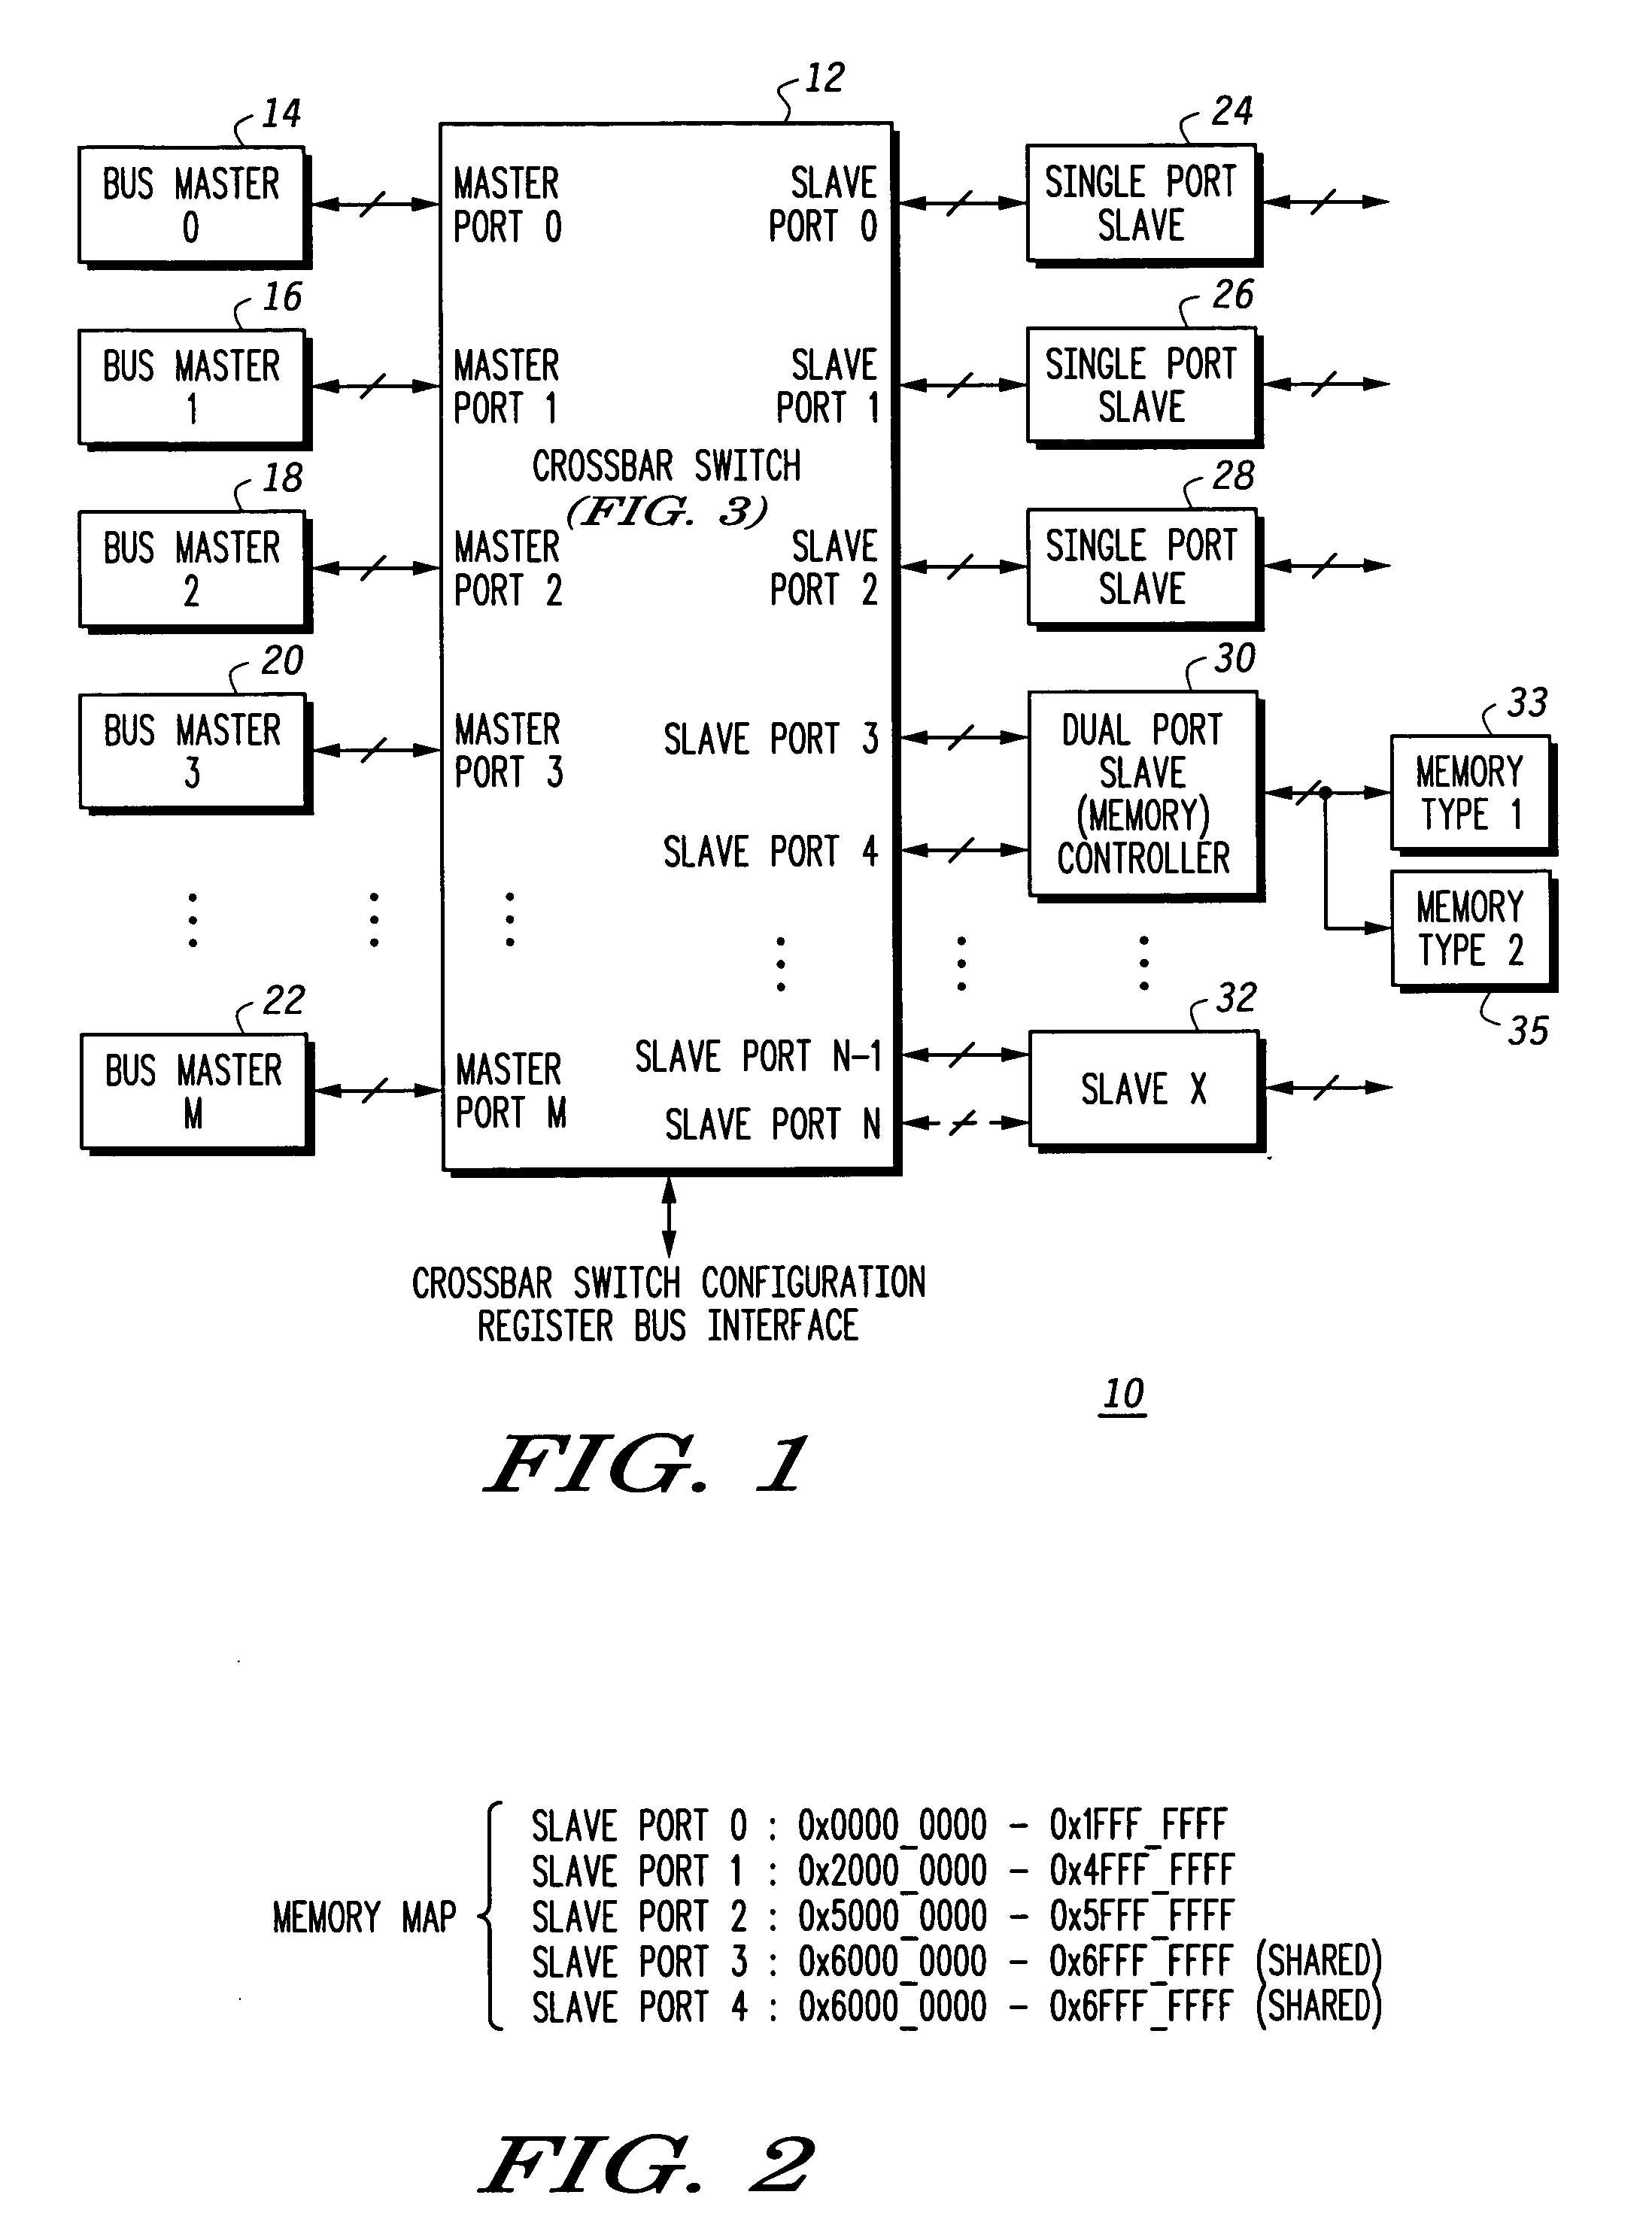 Crossbar switch that supports a multi-port slave device and method of operation